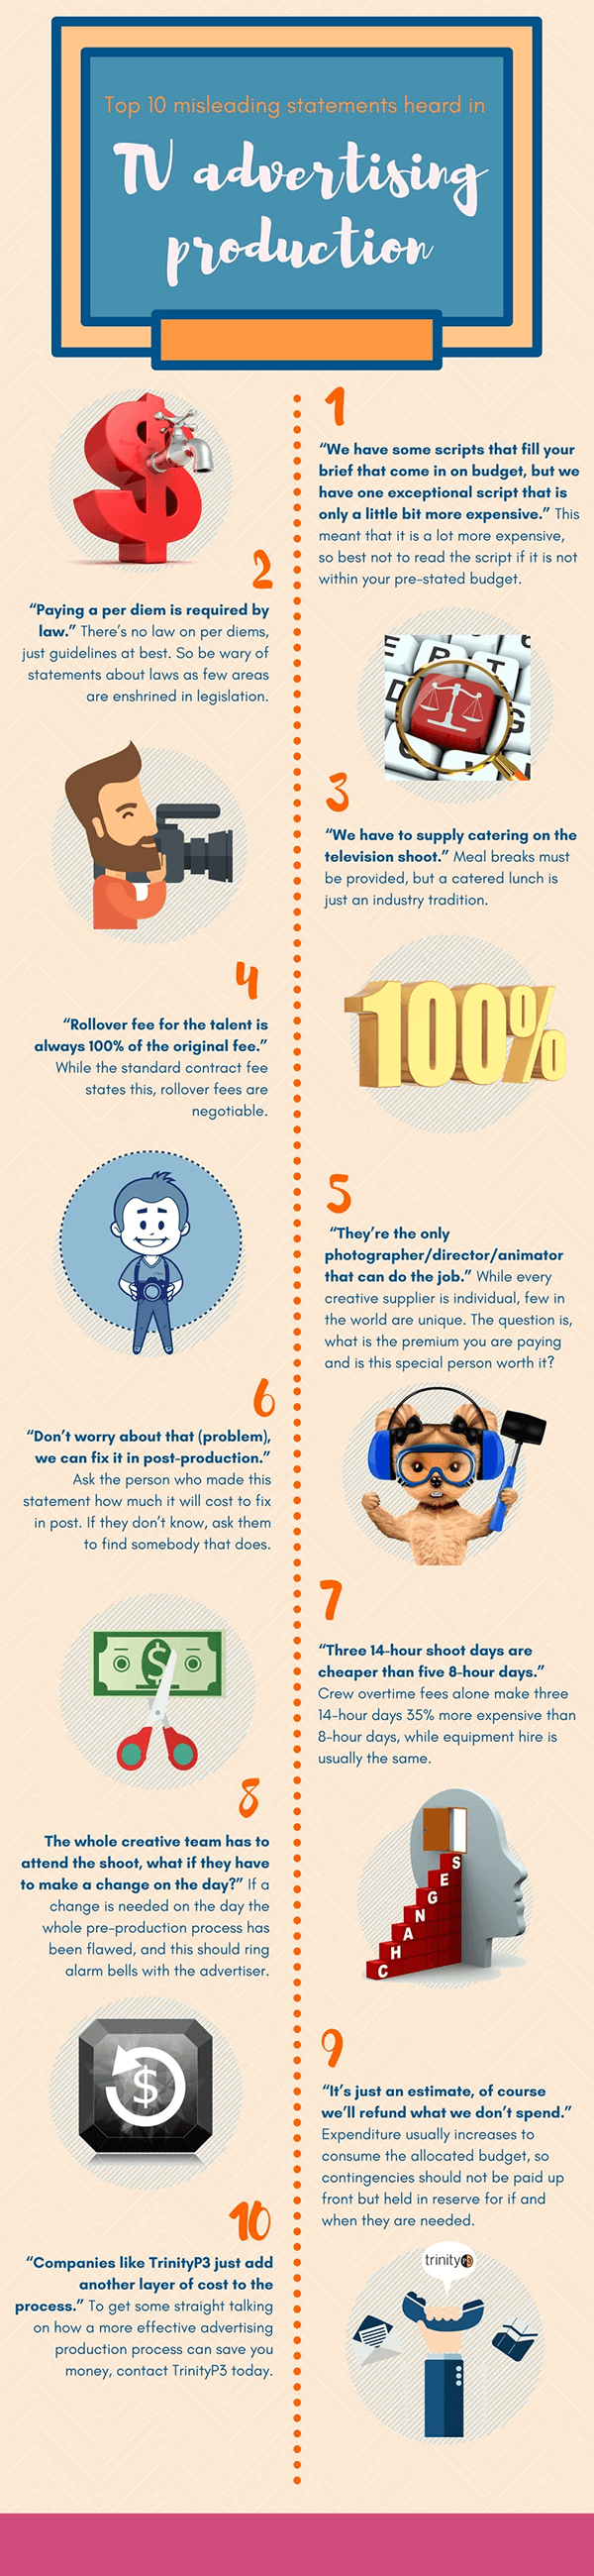 Top 10 misleading statements heard in TV advertising production - Infographic